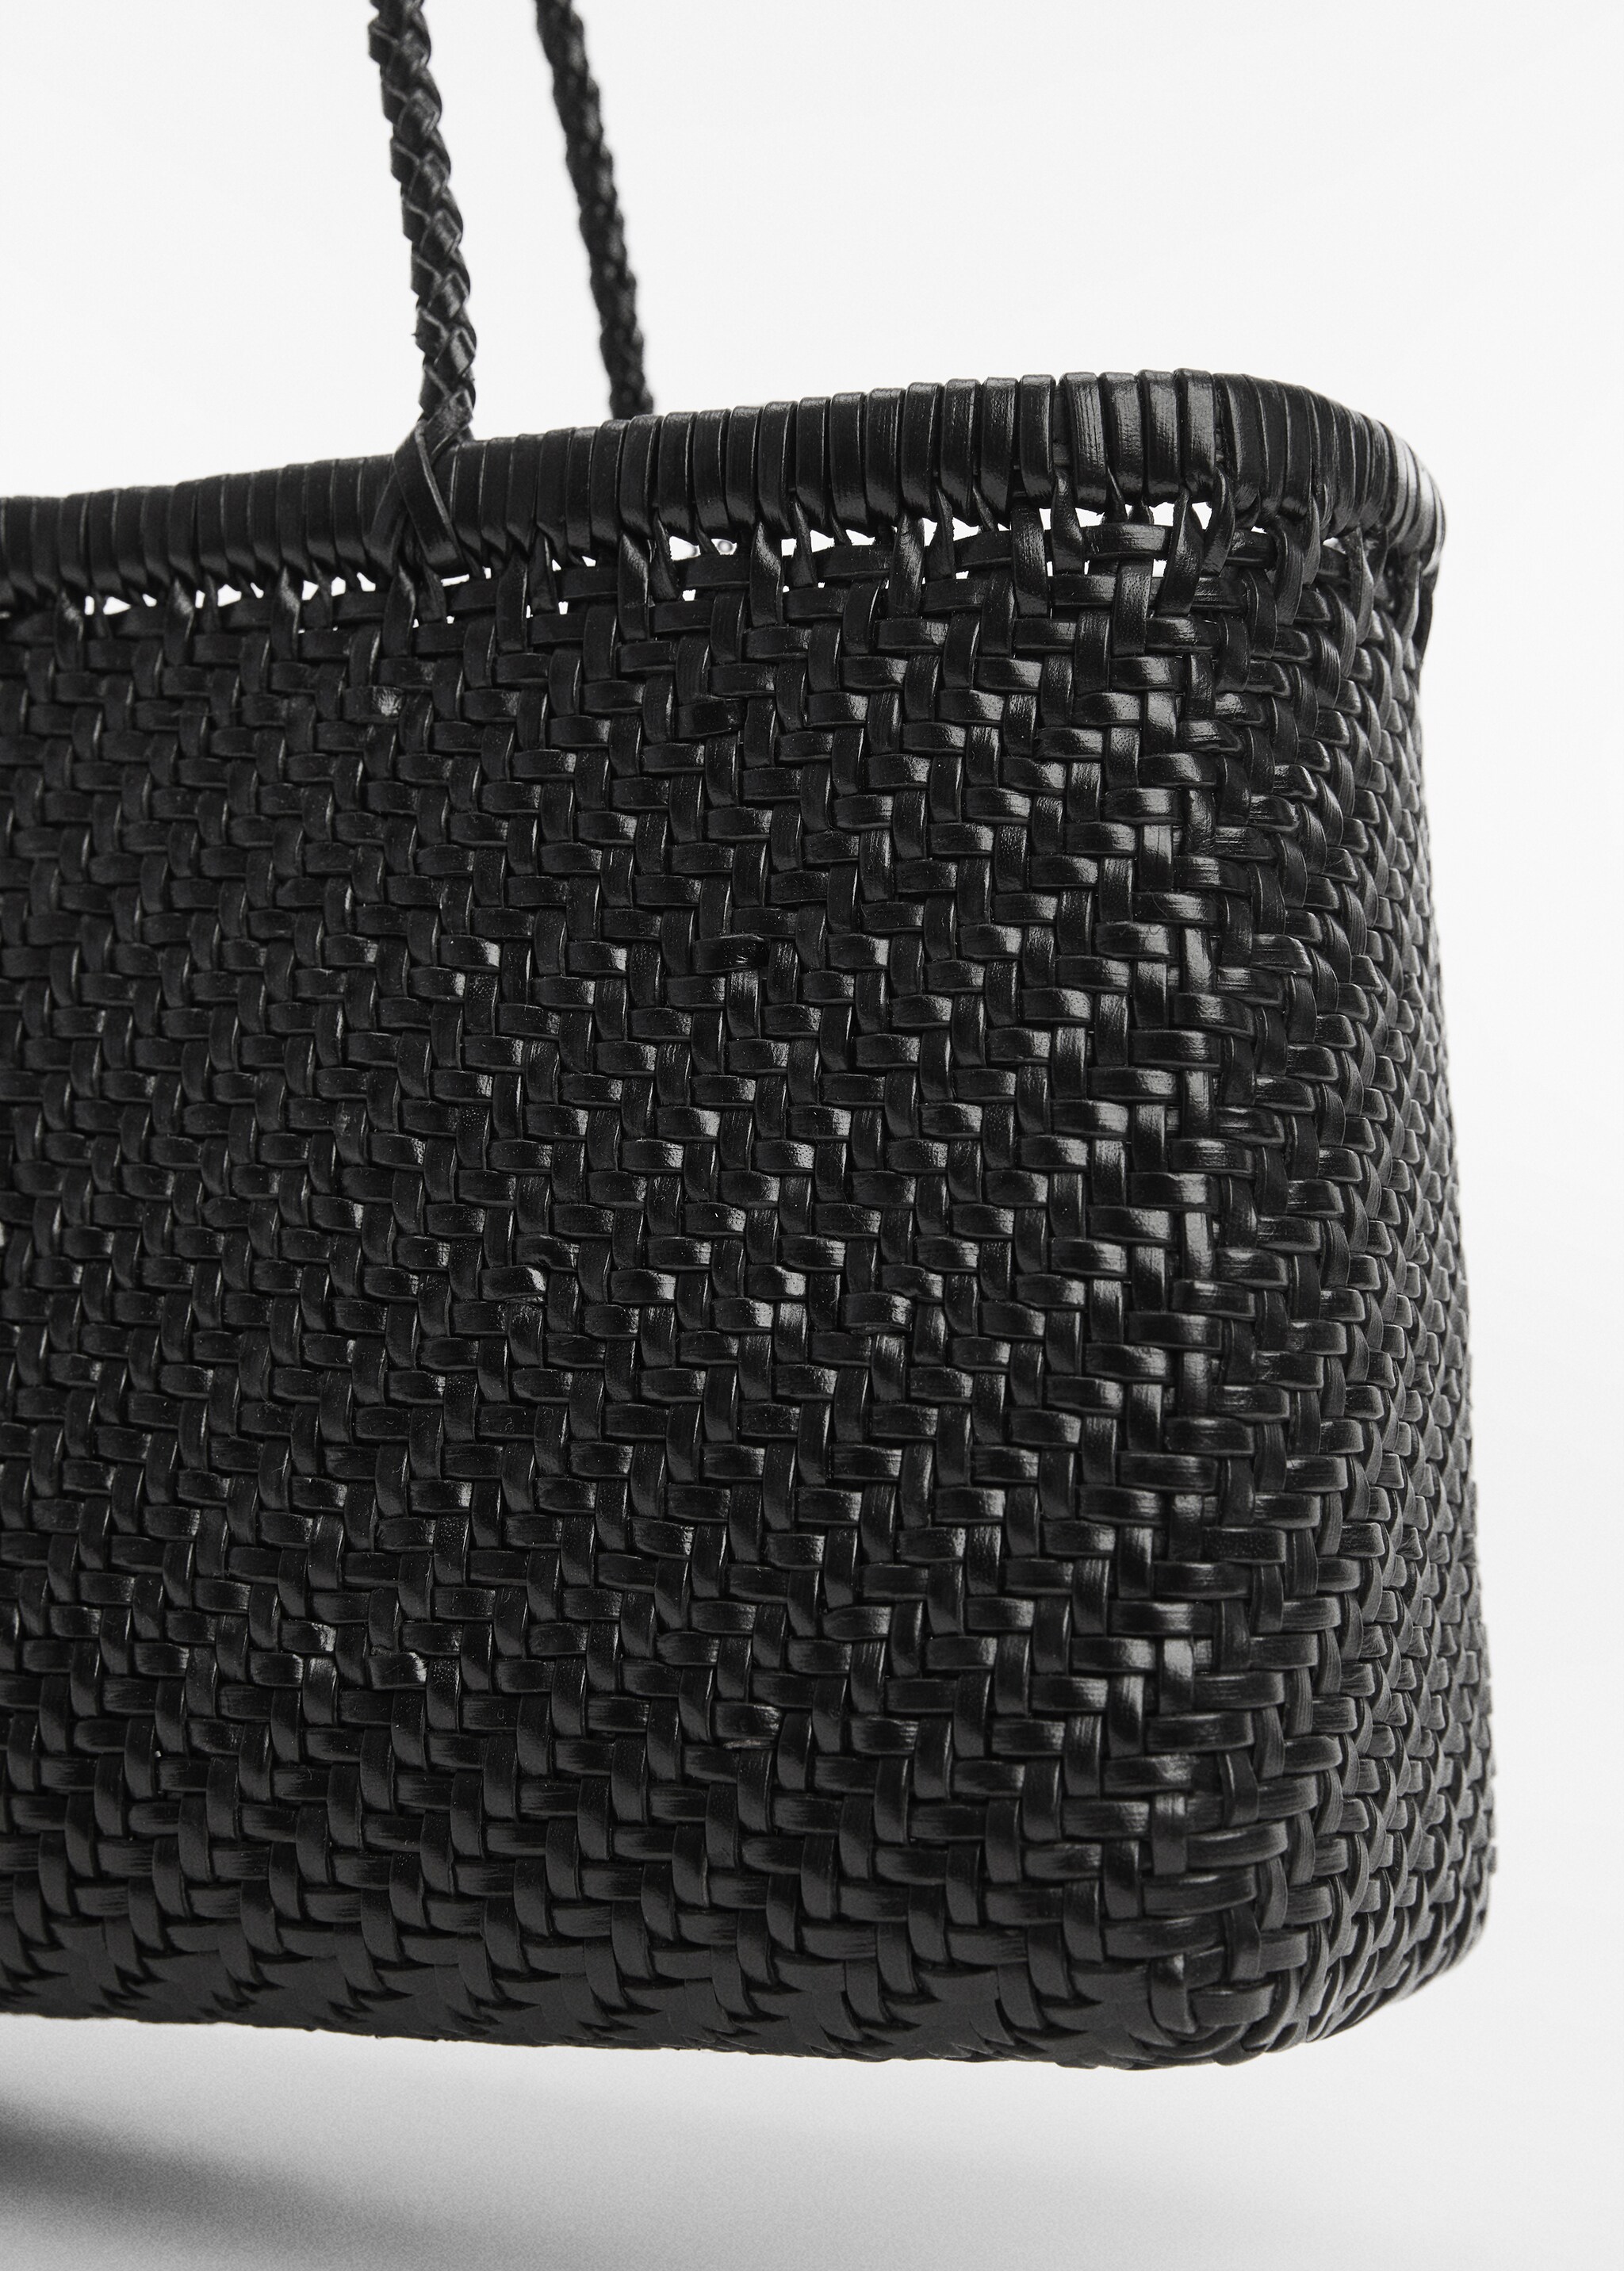 Braided leather bag - Details of the article 2